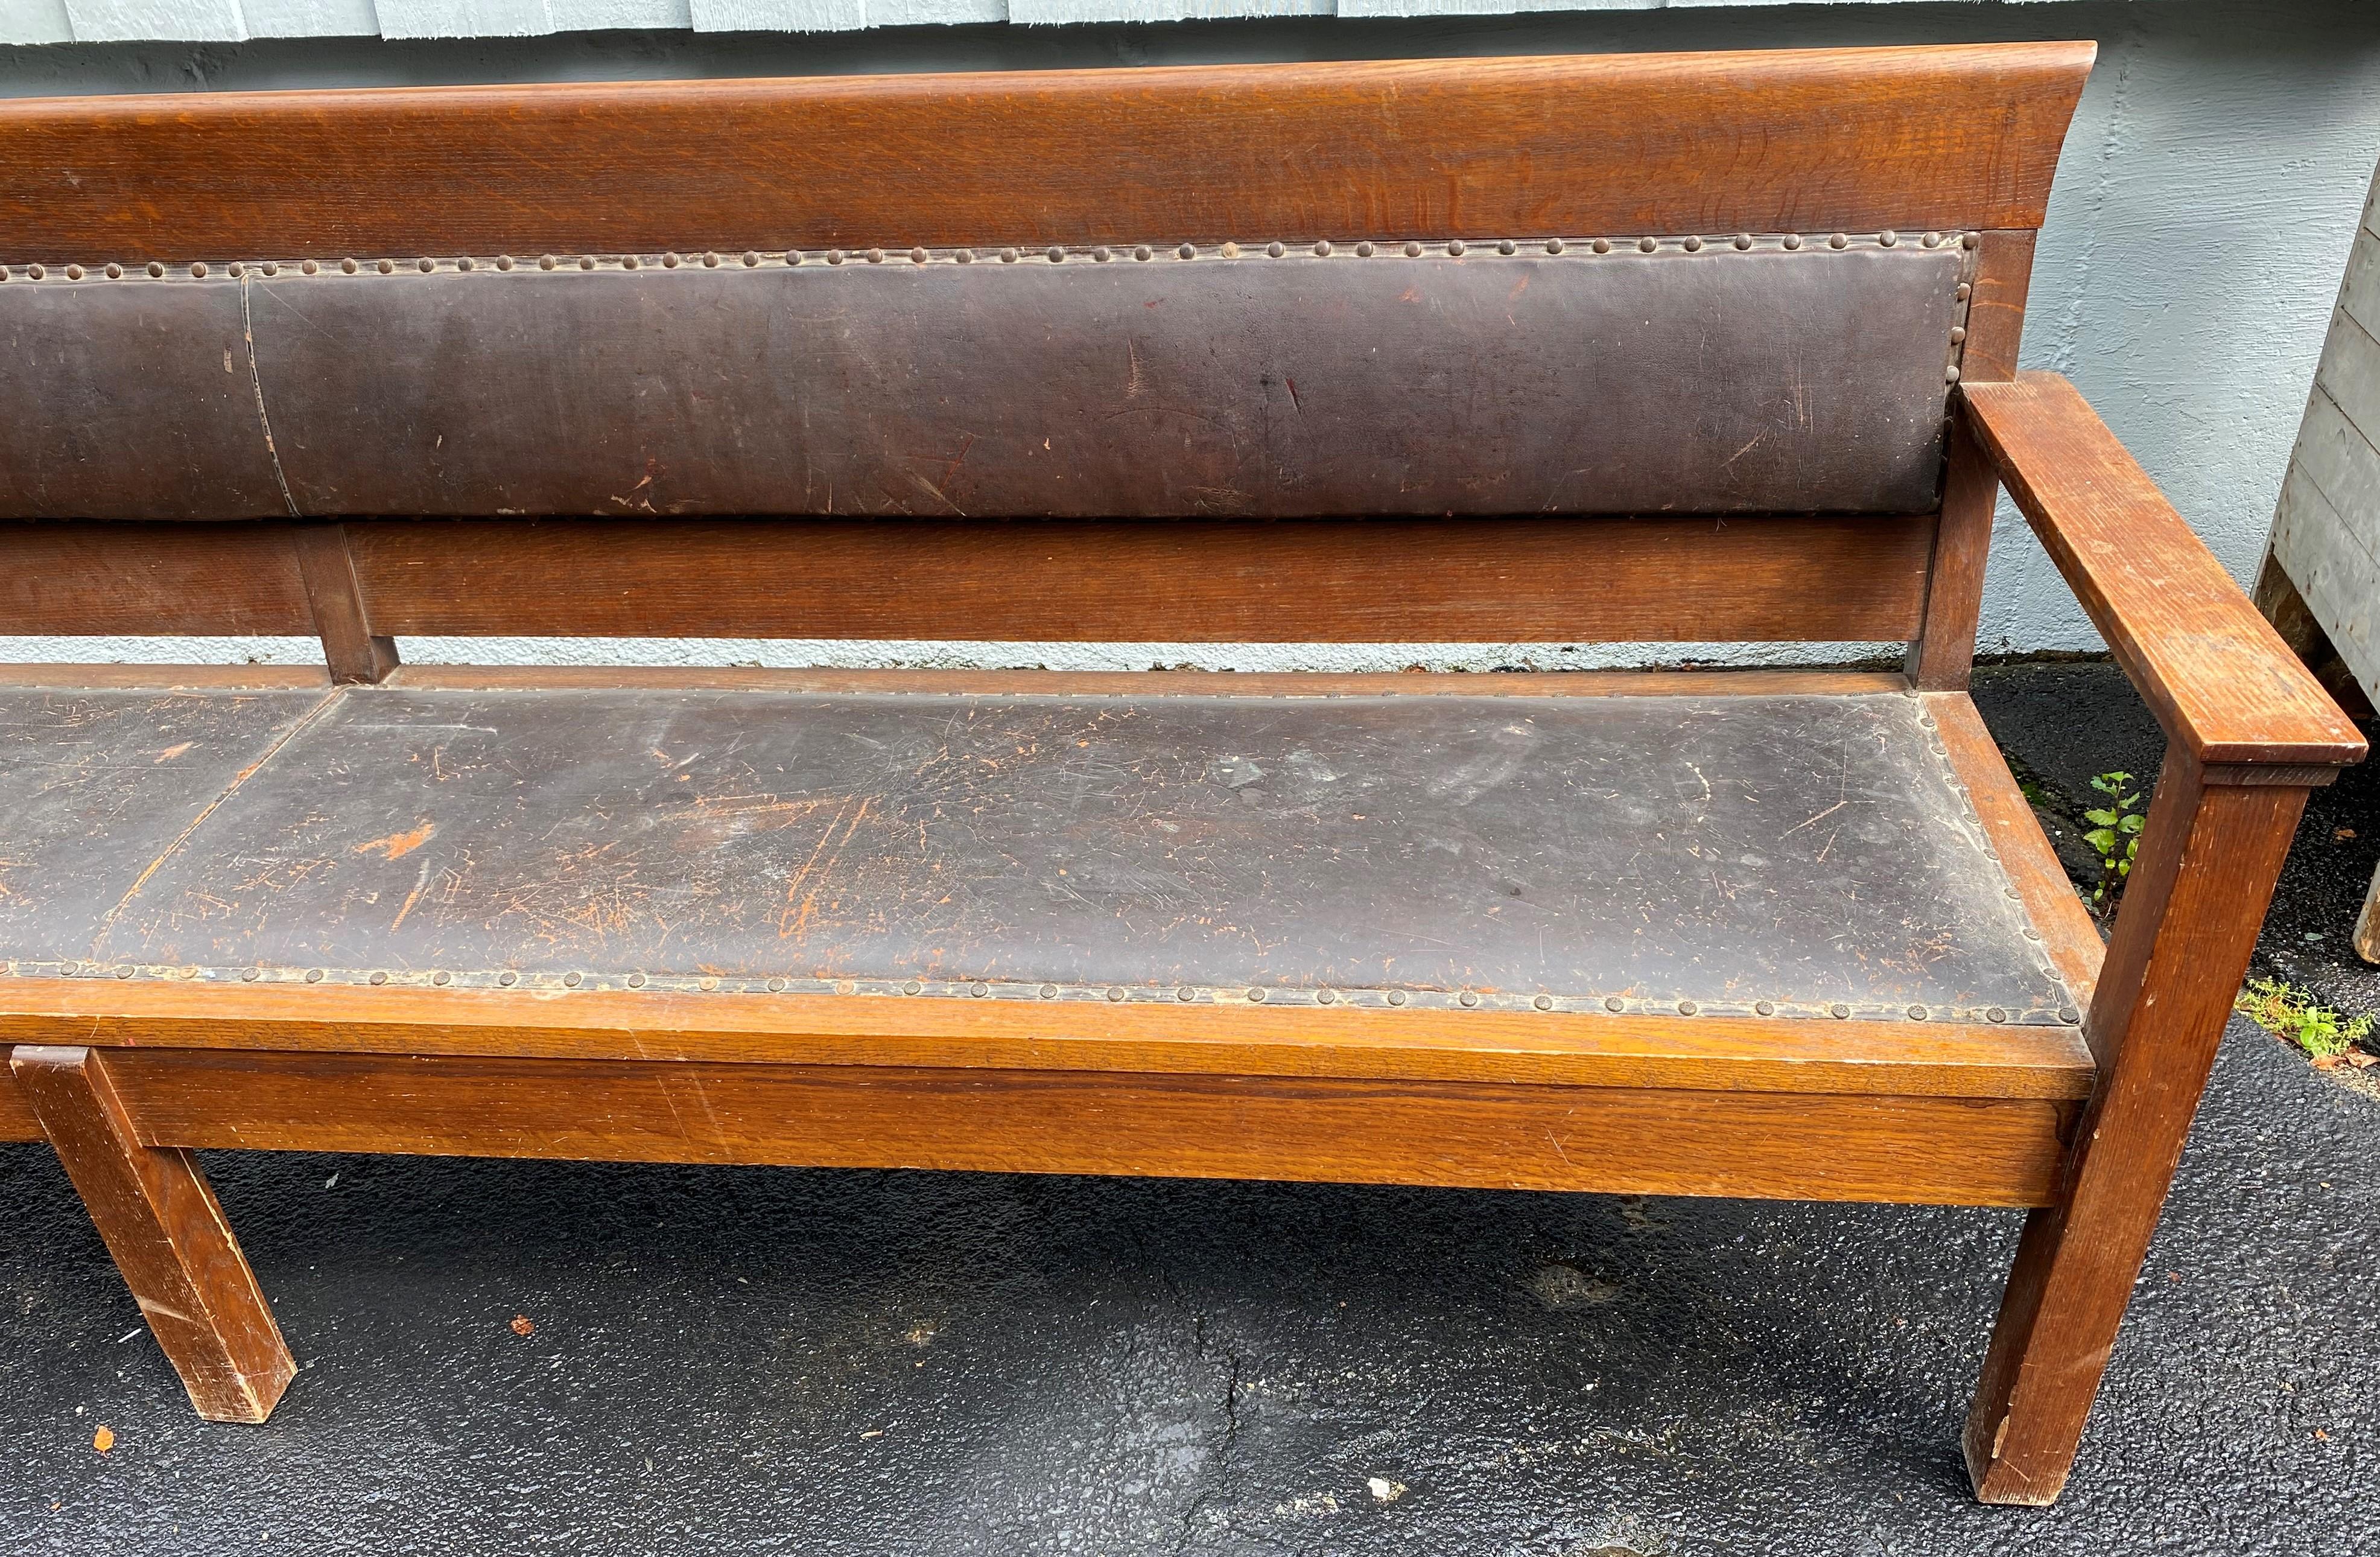 Hand-Carved Large Oak Railroad or Train Station Bench w/ Original Leather circa 1910